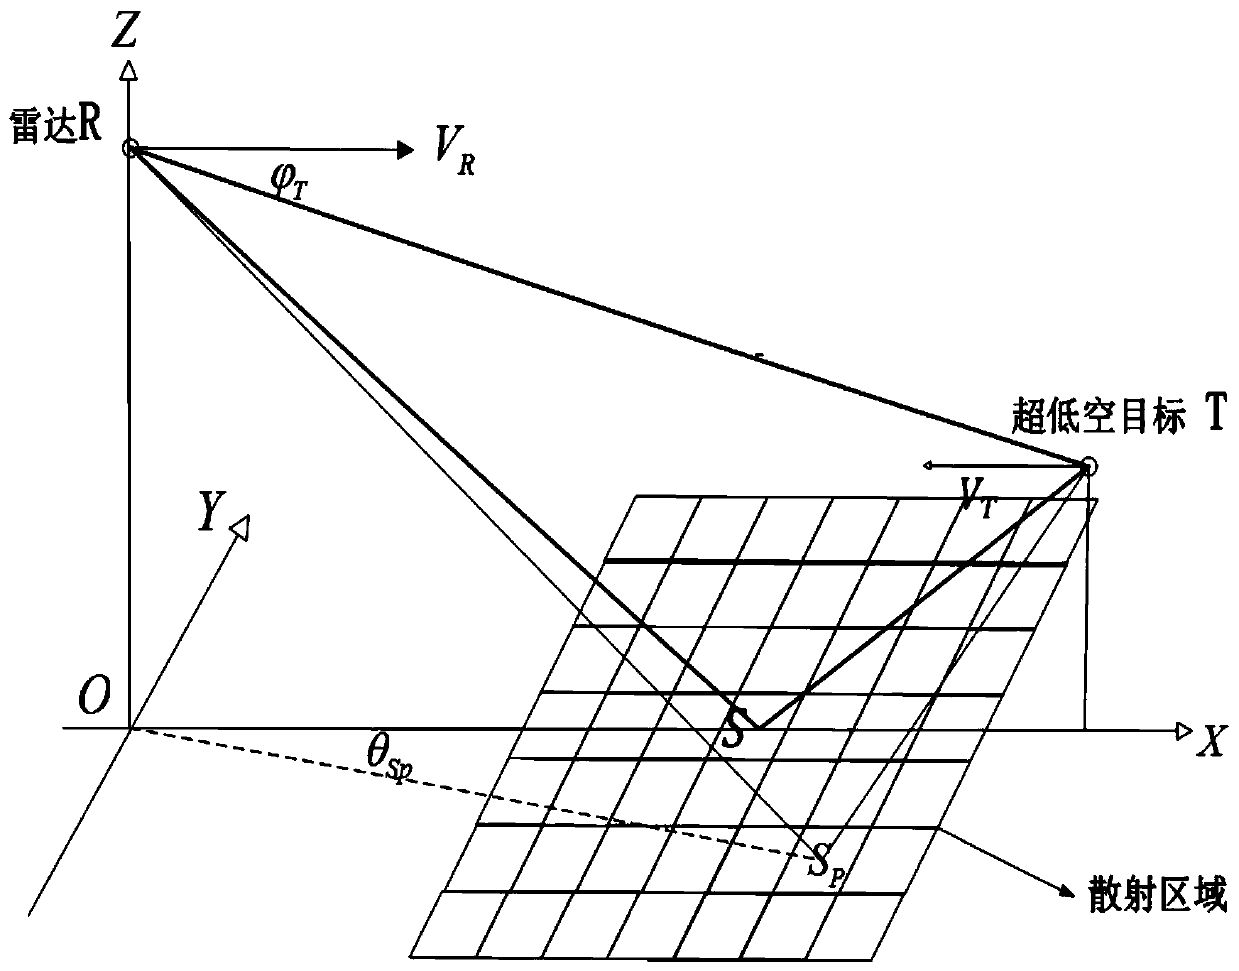 A Modeling Method for Ultra-low Altitude Target and Multipath Echo of Missile-borne PD System Radar